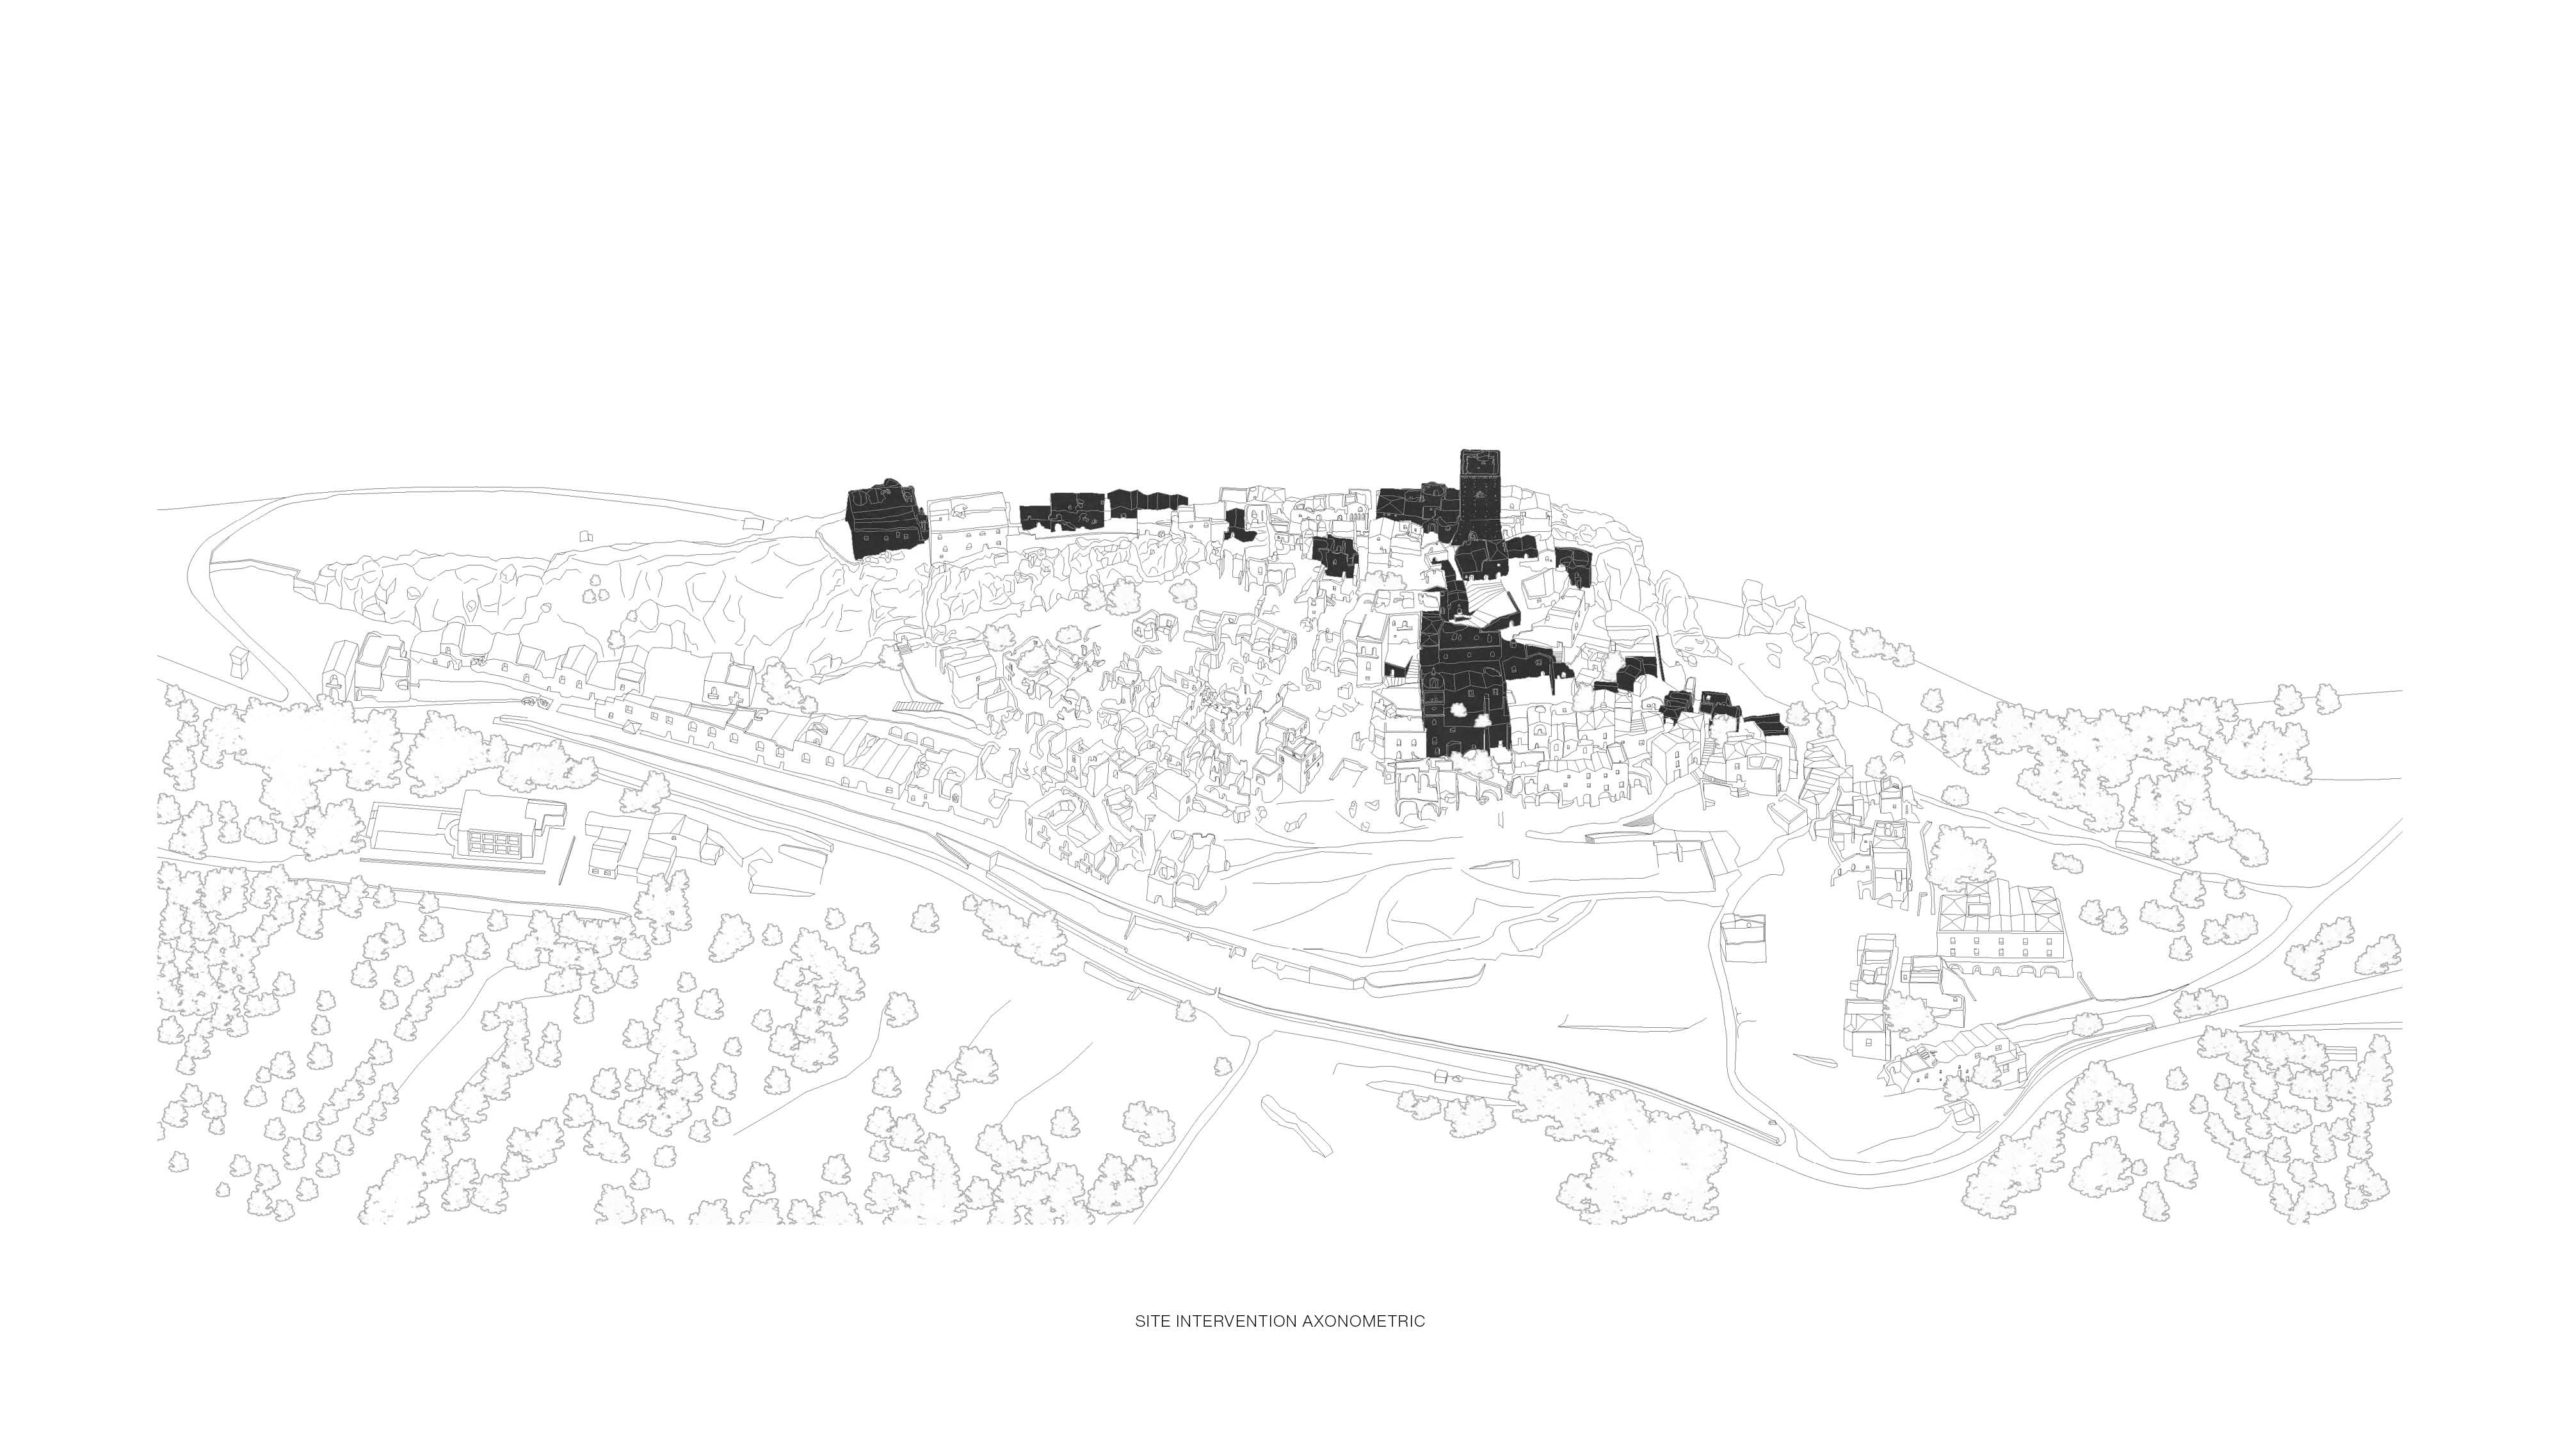 Unbuilt : TRACES - GHOST TOWN REFUGE, at Craco, Italy, by Claudio C. Araya, Yahya Abdullah 3